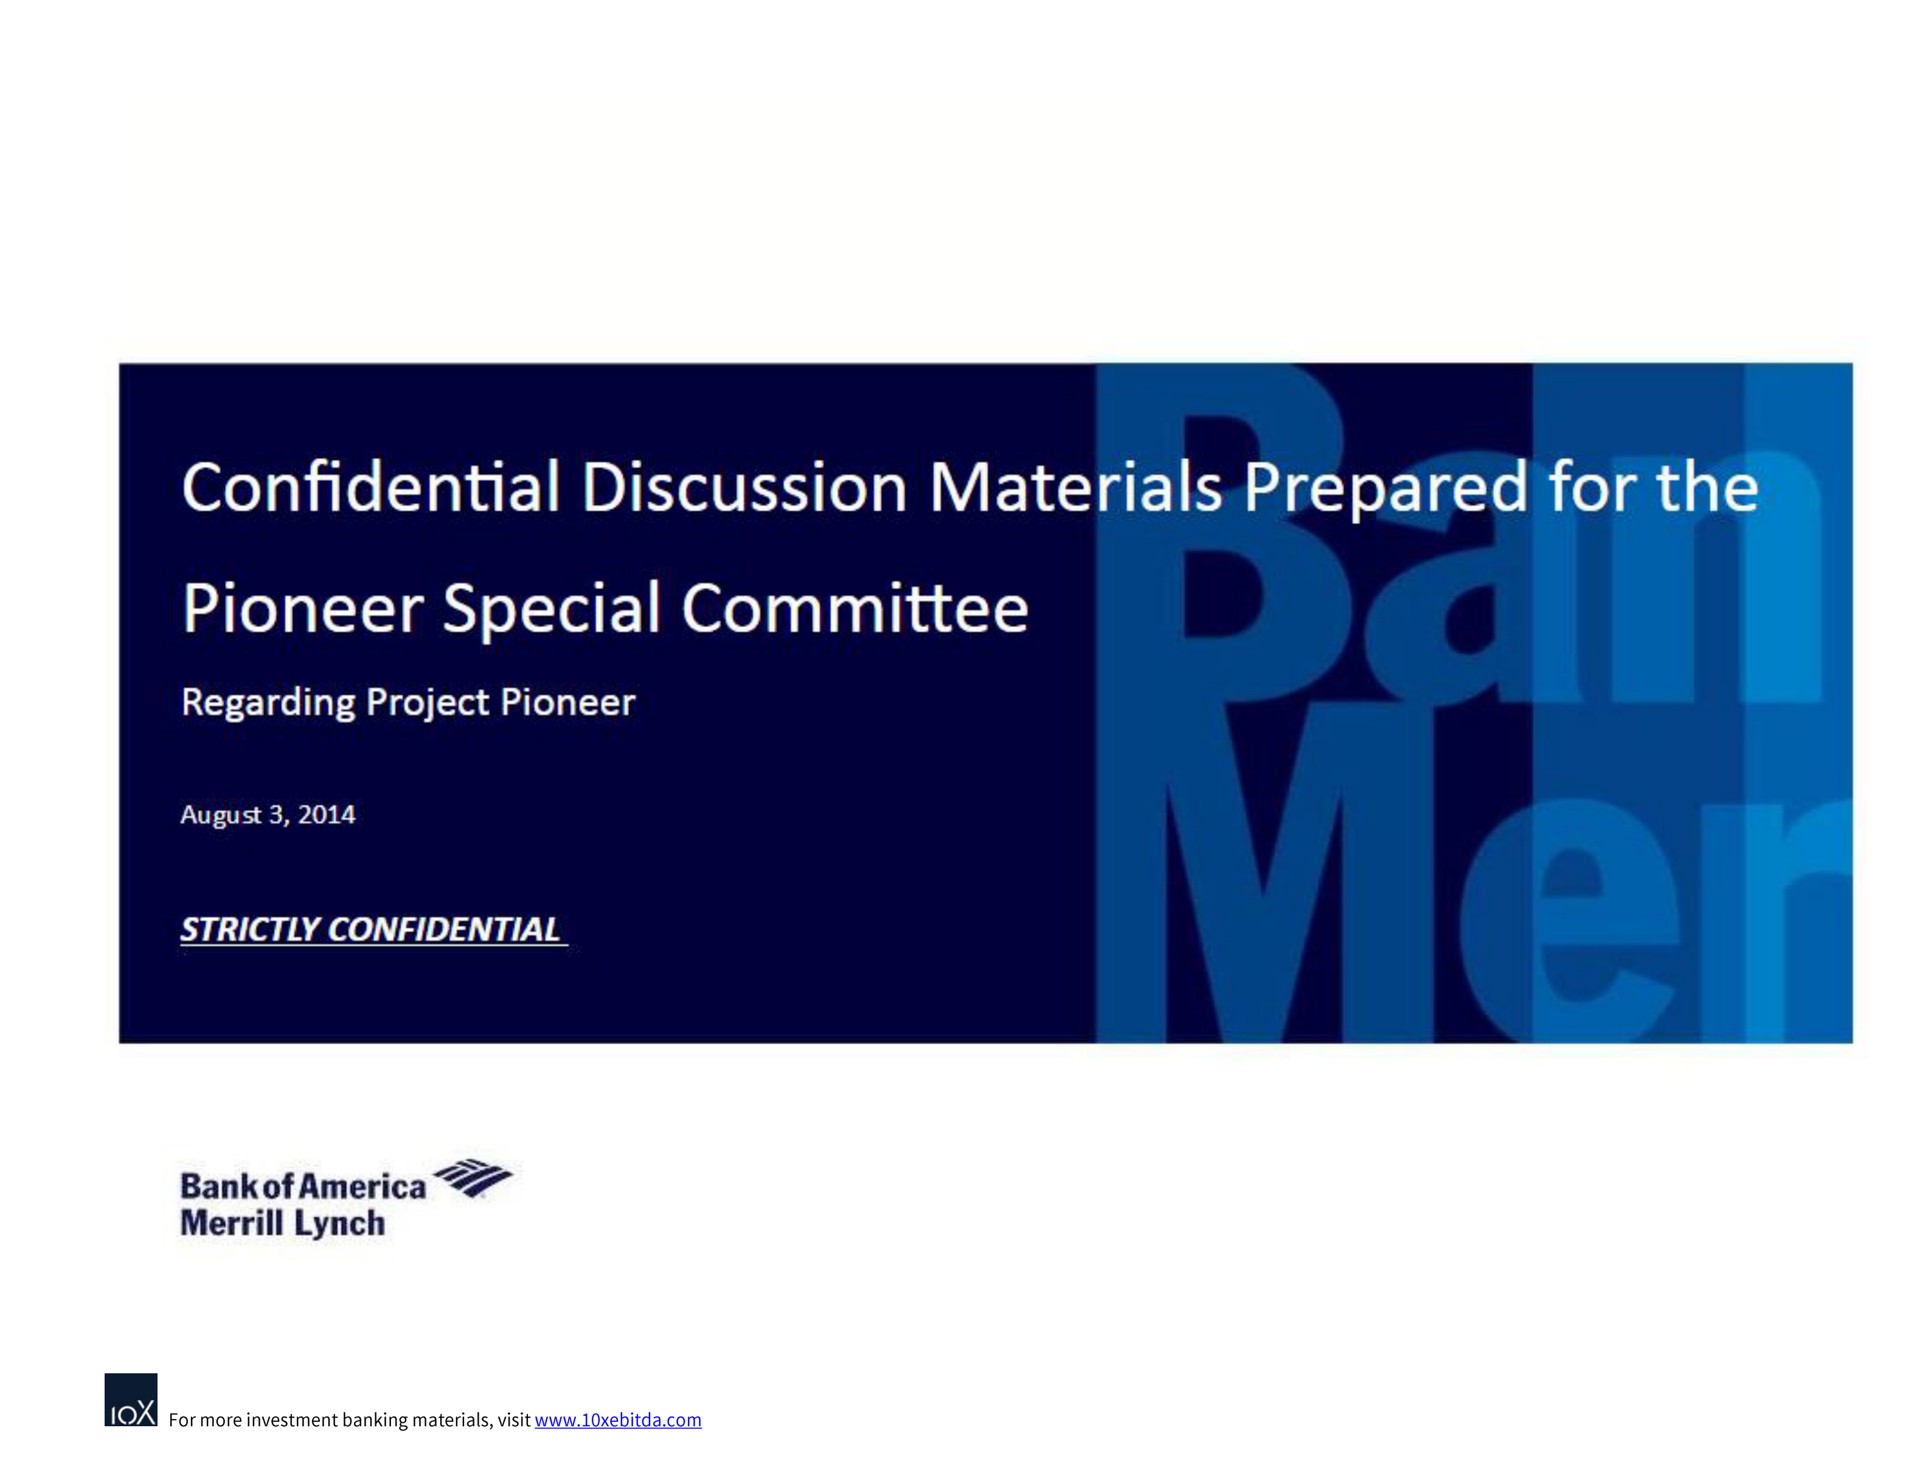 confidential discussion materials prepared for the pioneer special committee regarding project pioneer aye aes lynch | Bank of America